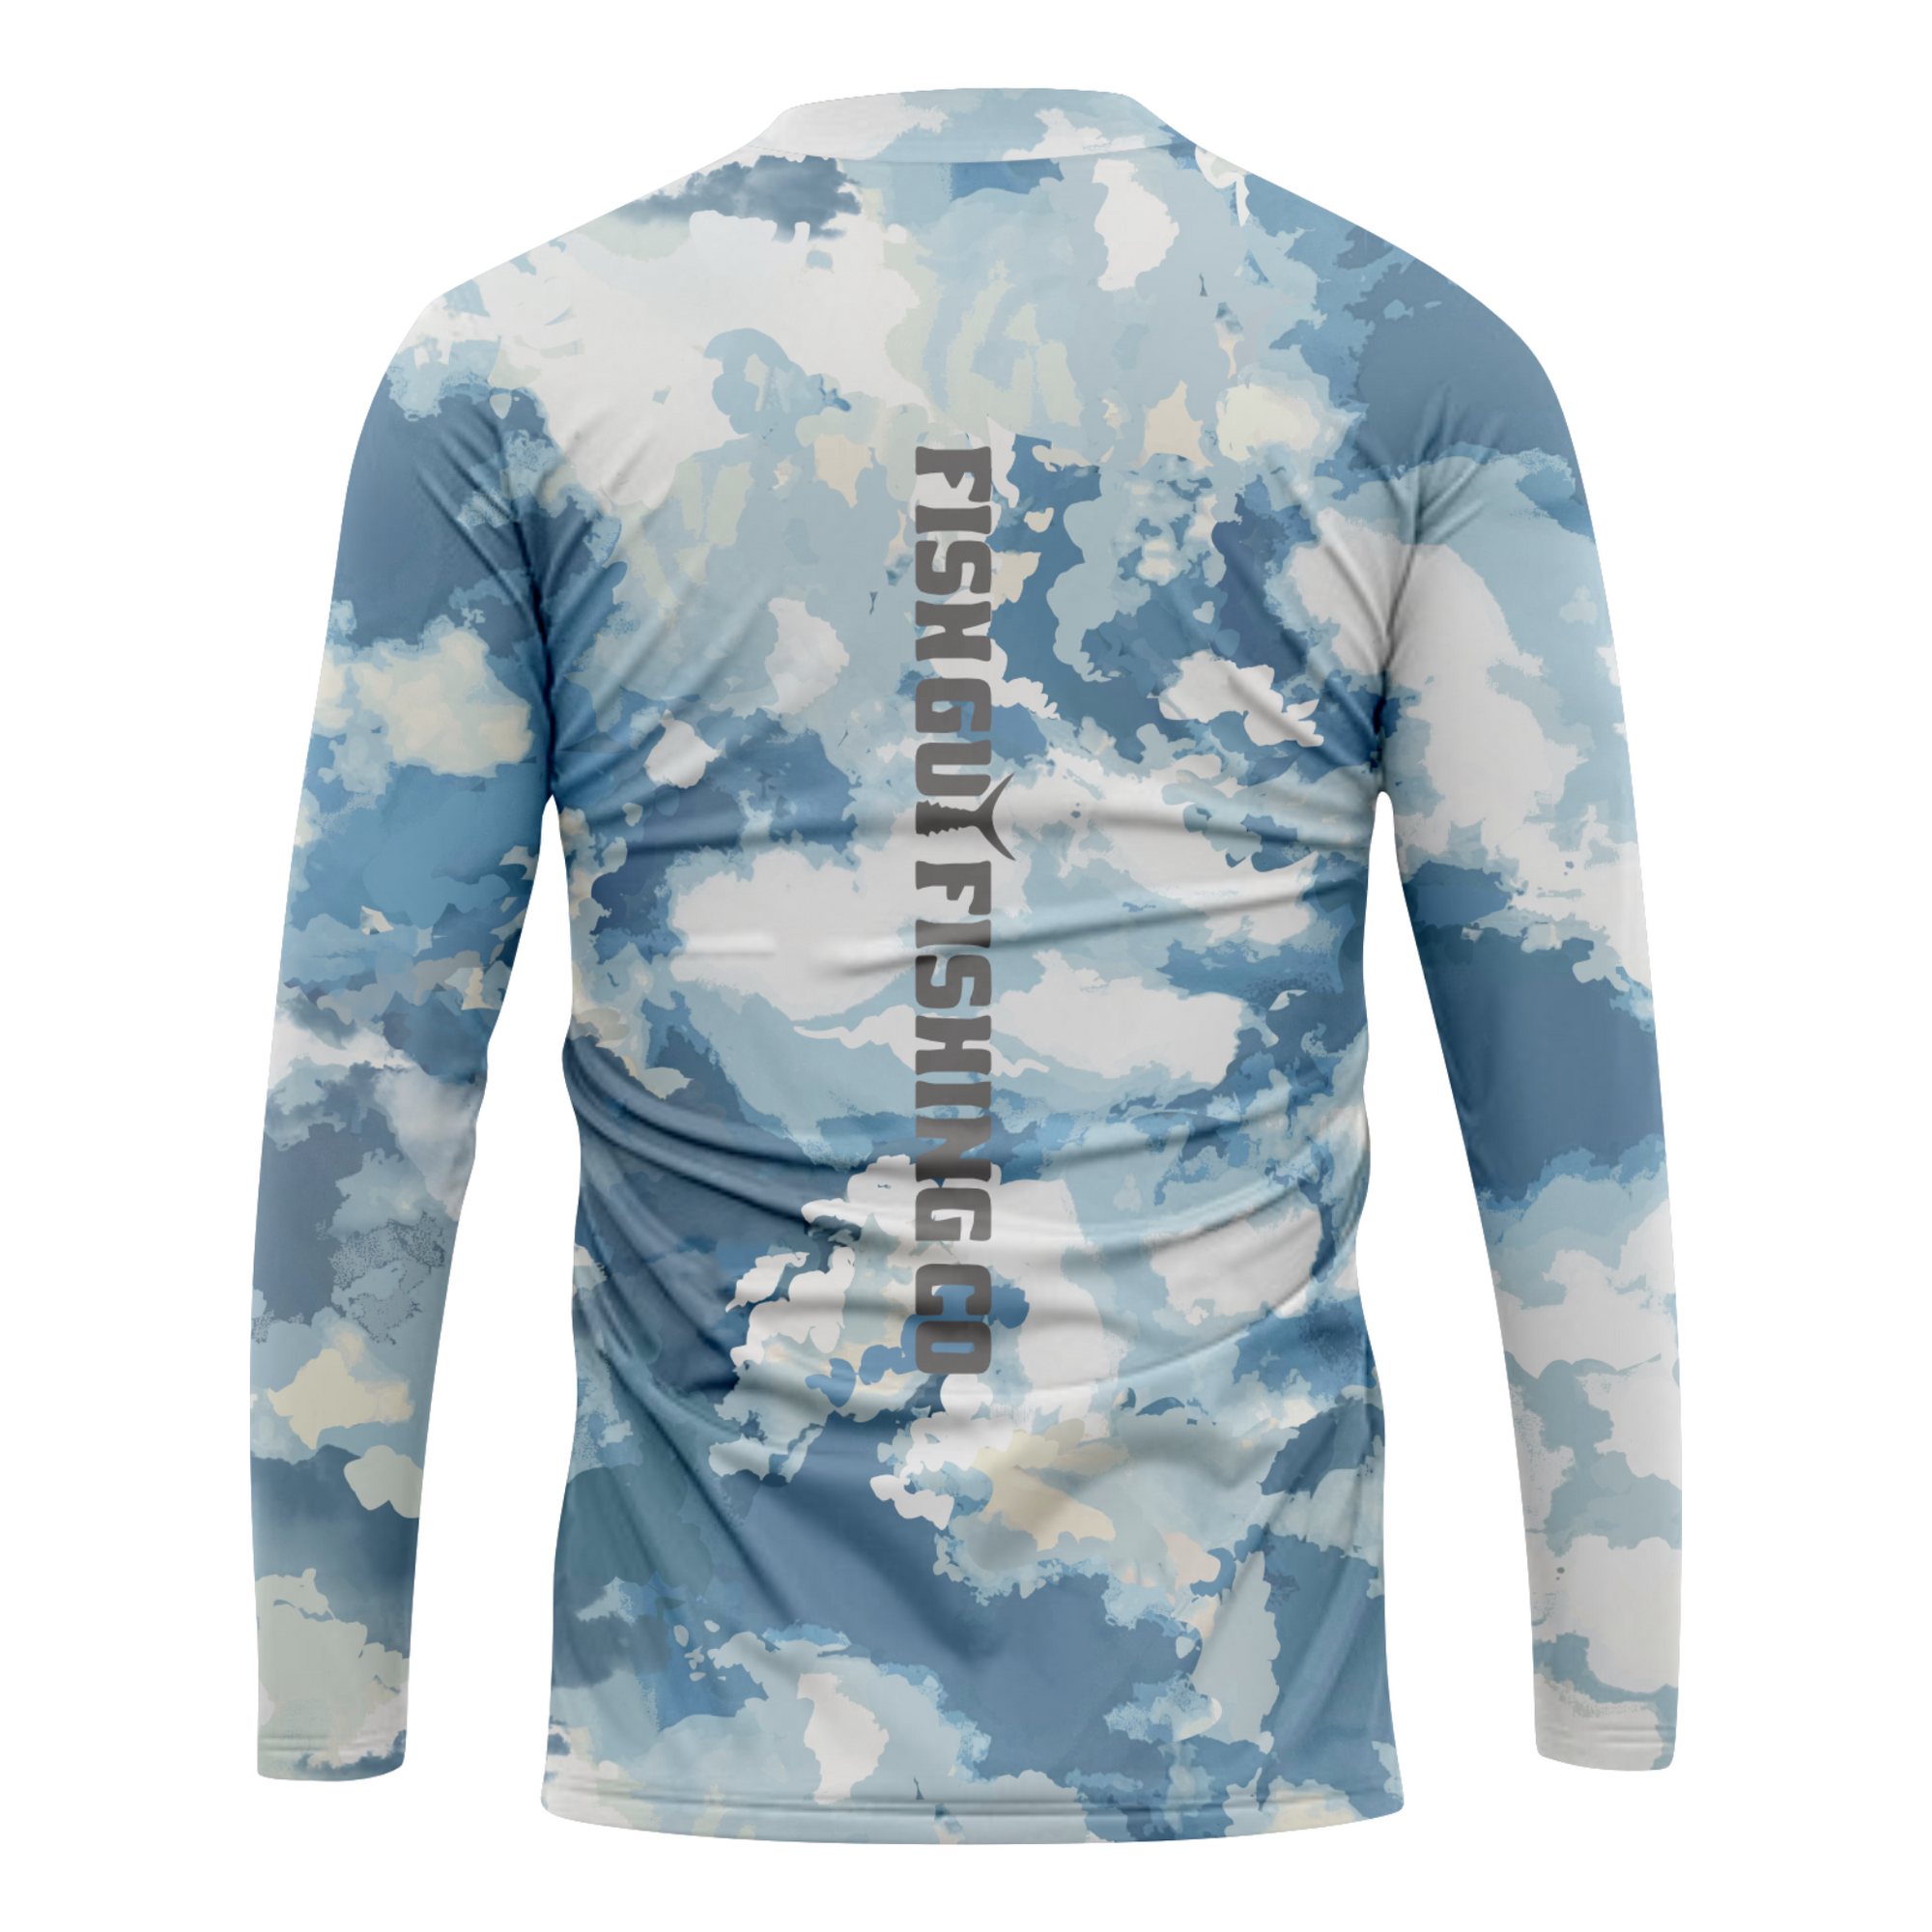 Cloud Cover Performance Tee